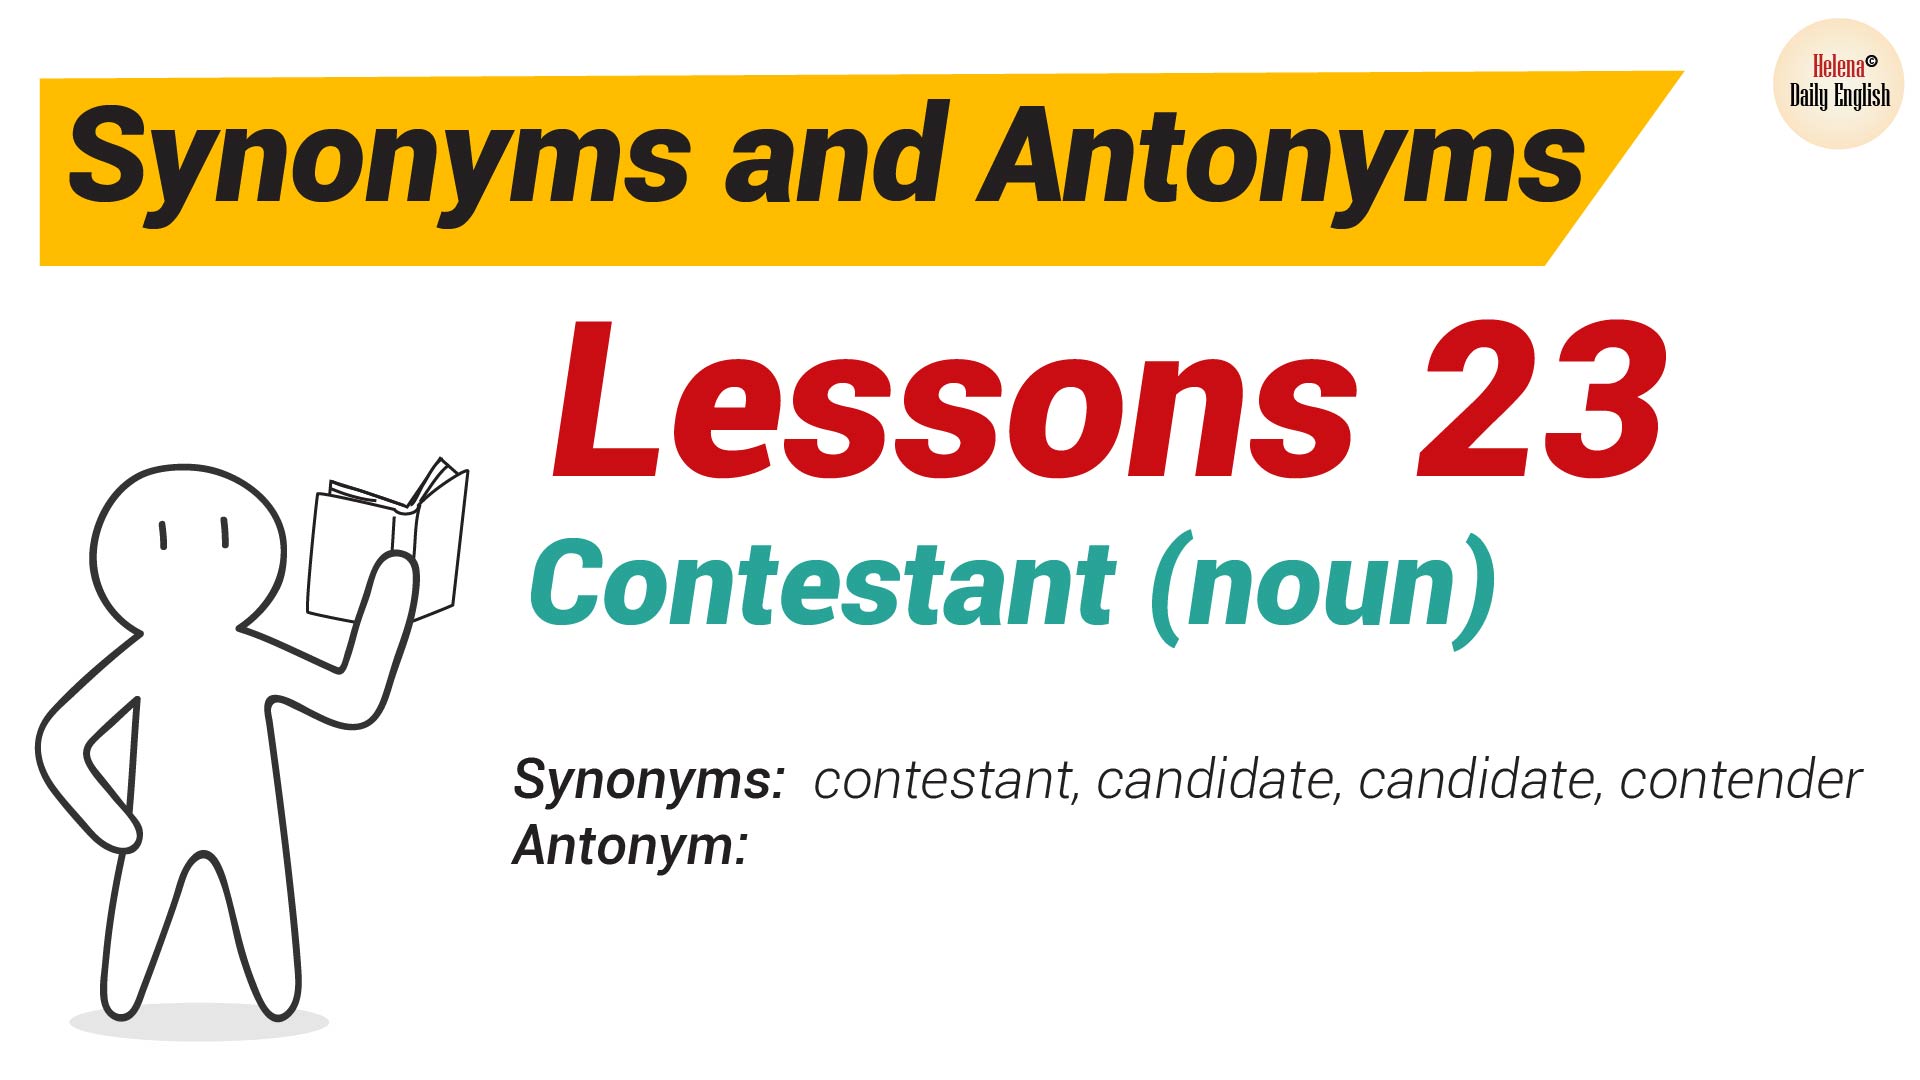 Synonyms and Antonyms Dictionary -Lesson 23: Contestant (noun)